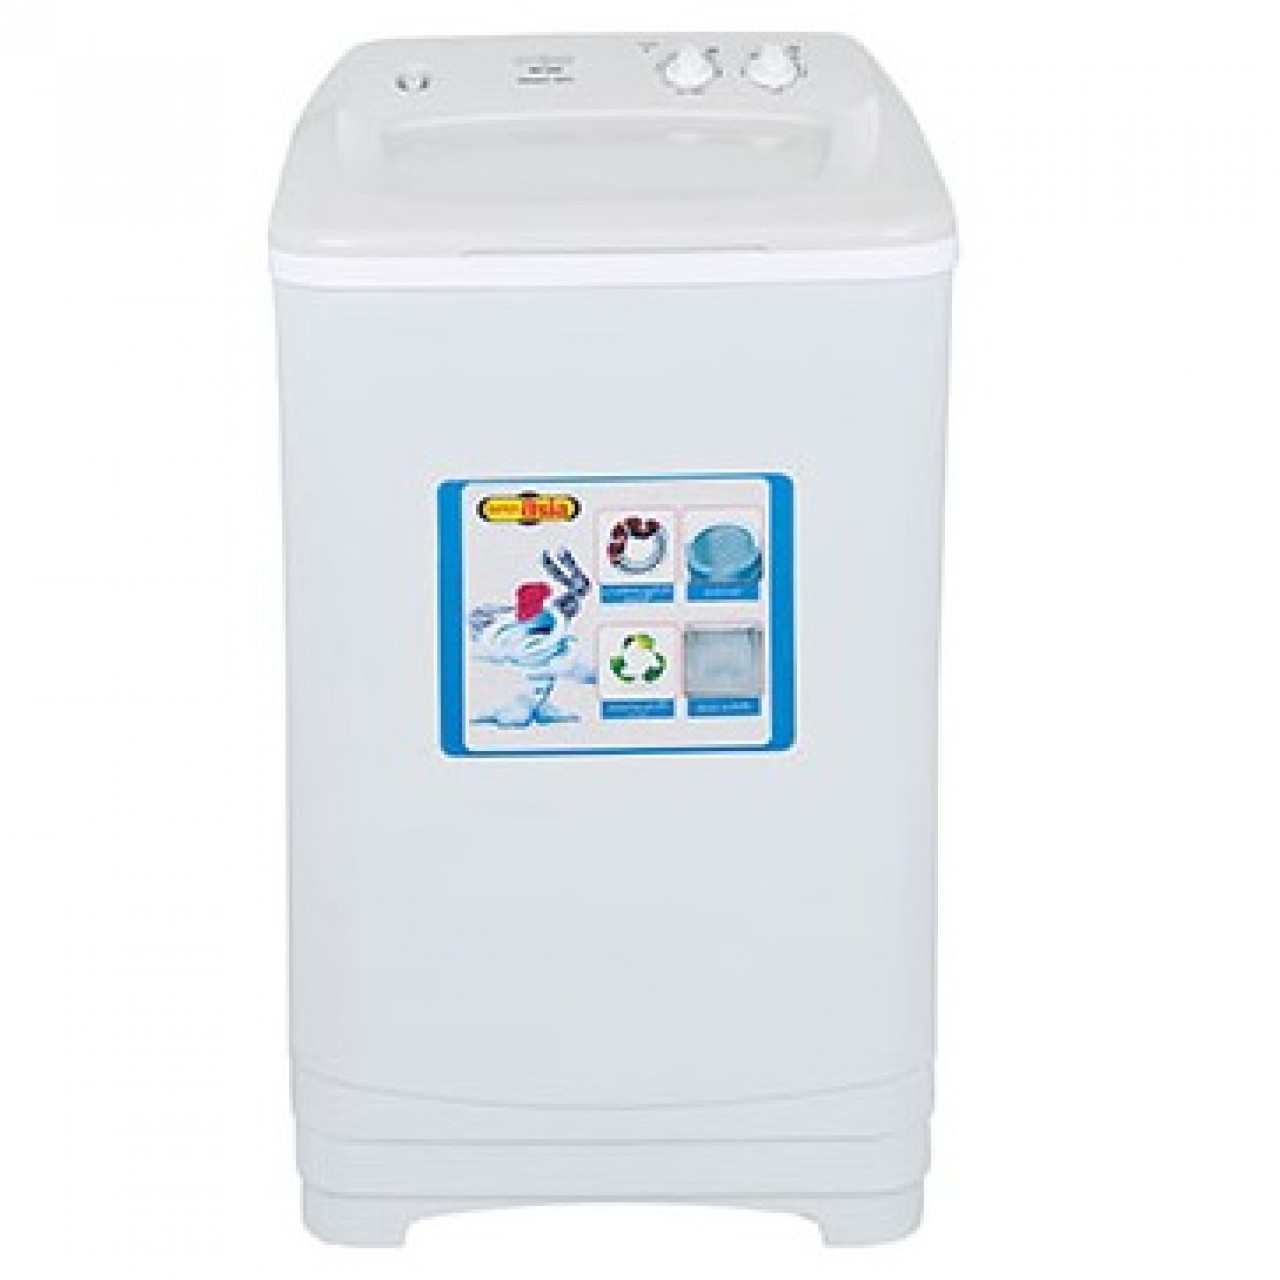 Super Asia SD-540 Double Body Shower Spin Dryer Machine - Capacity 10Kg